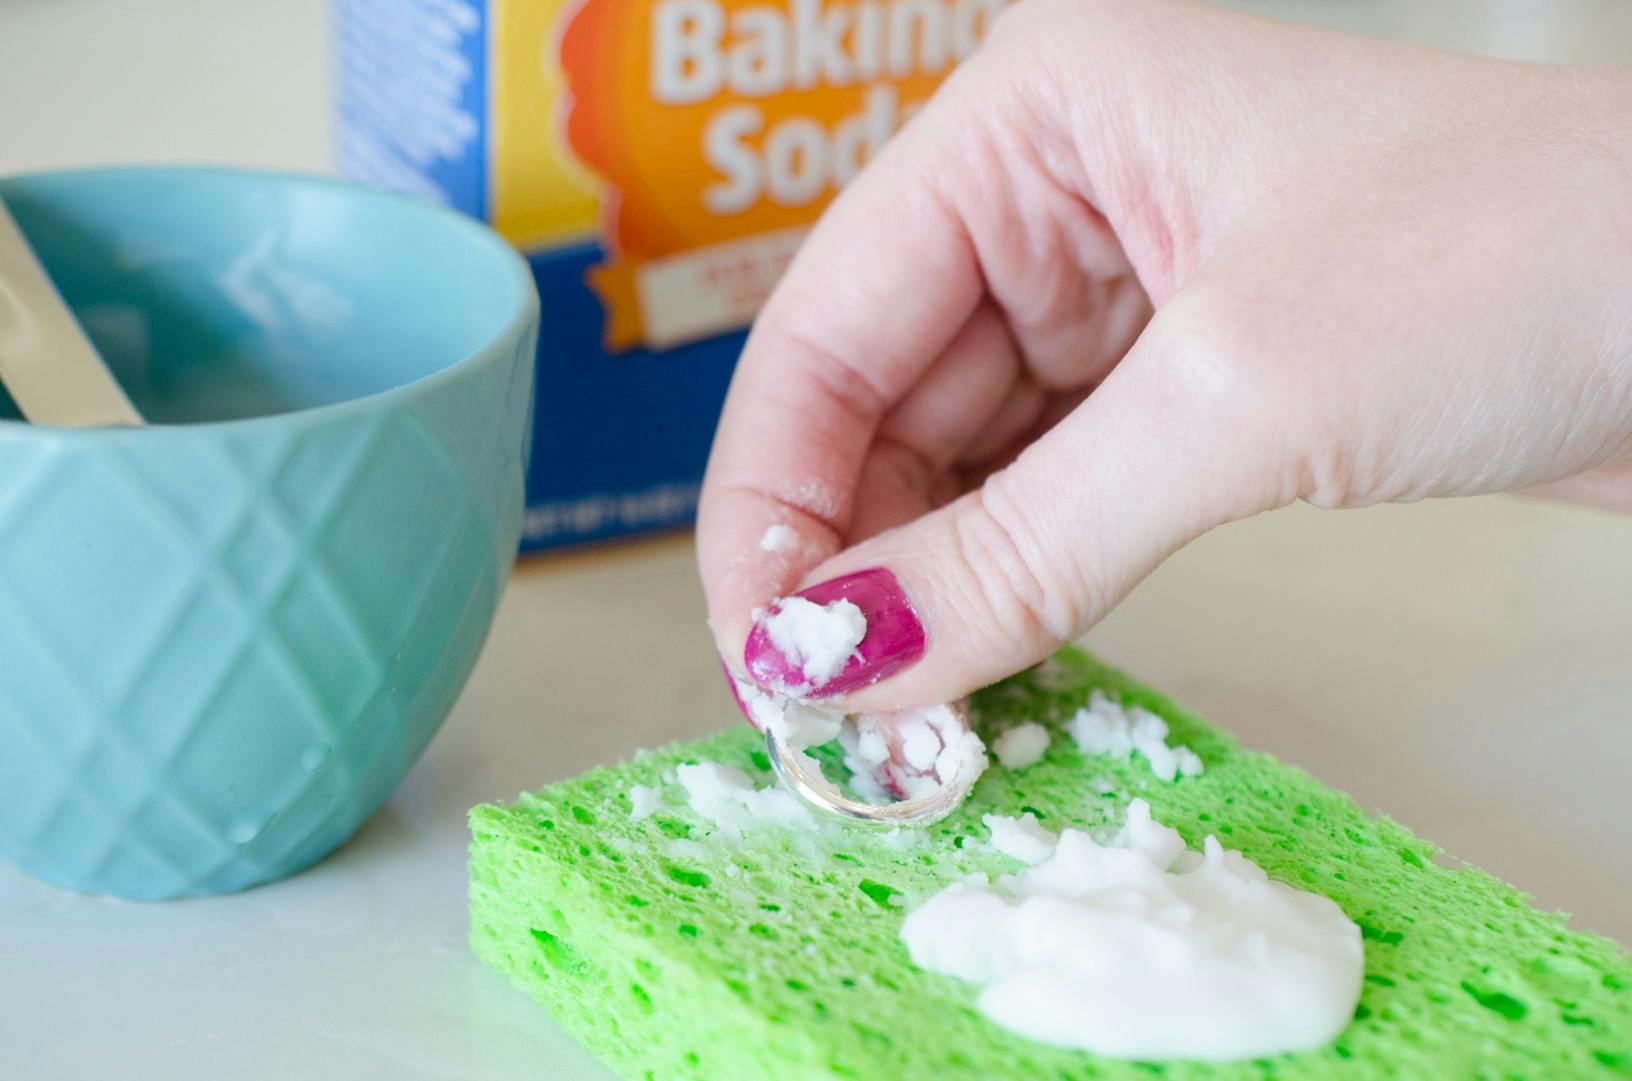 Someone placing a ring on a sponge with baking soda 